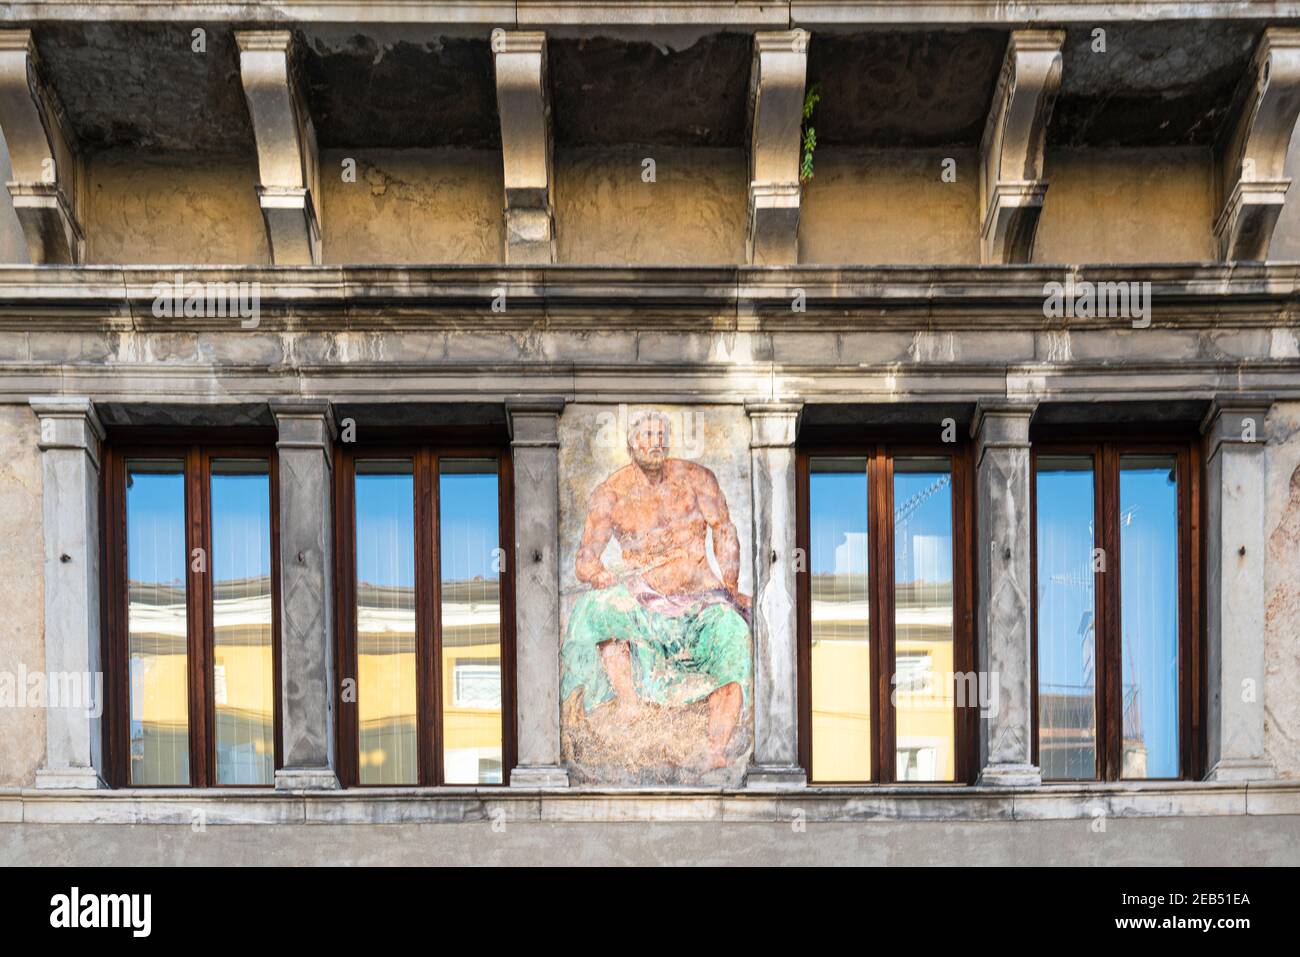 Udine, Italy. February 11, 2020. the facade of the Sabbadini House, built in the 16th century with the fresco of Jupiter, painted by G.B. Bassi Stock Photo